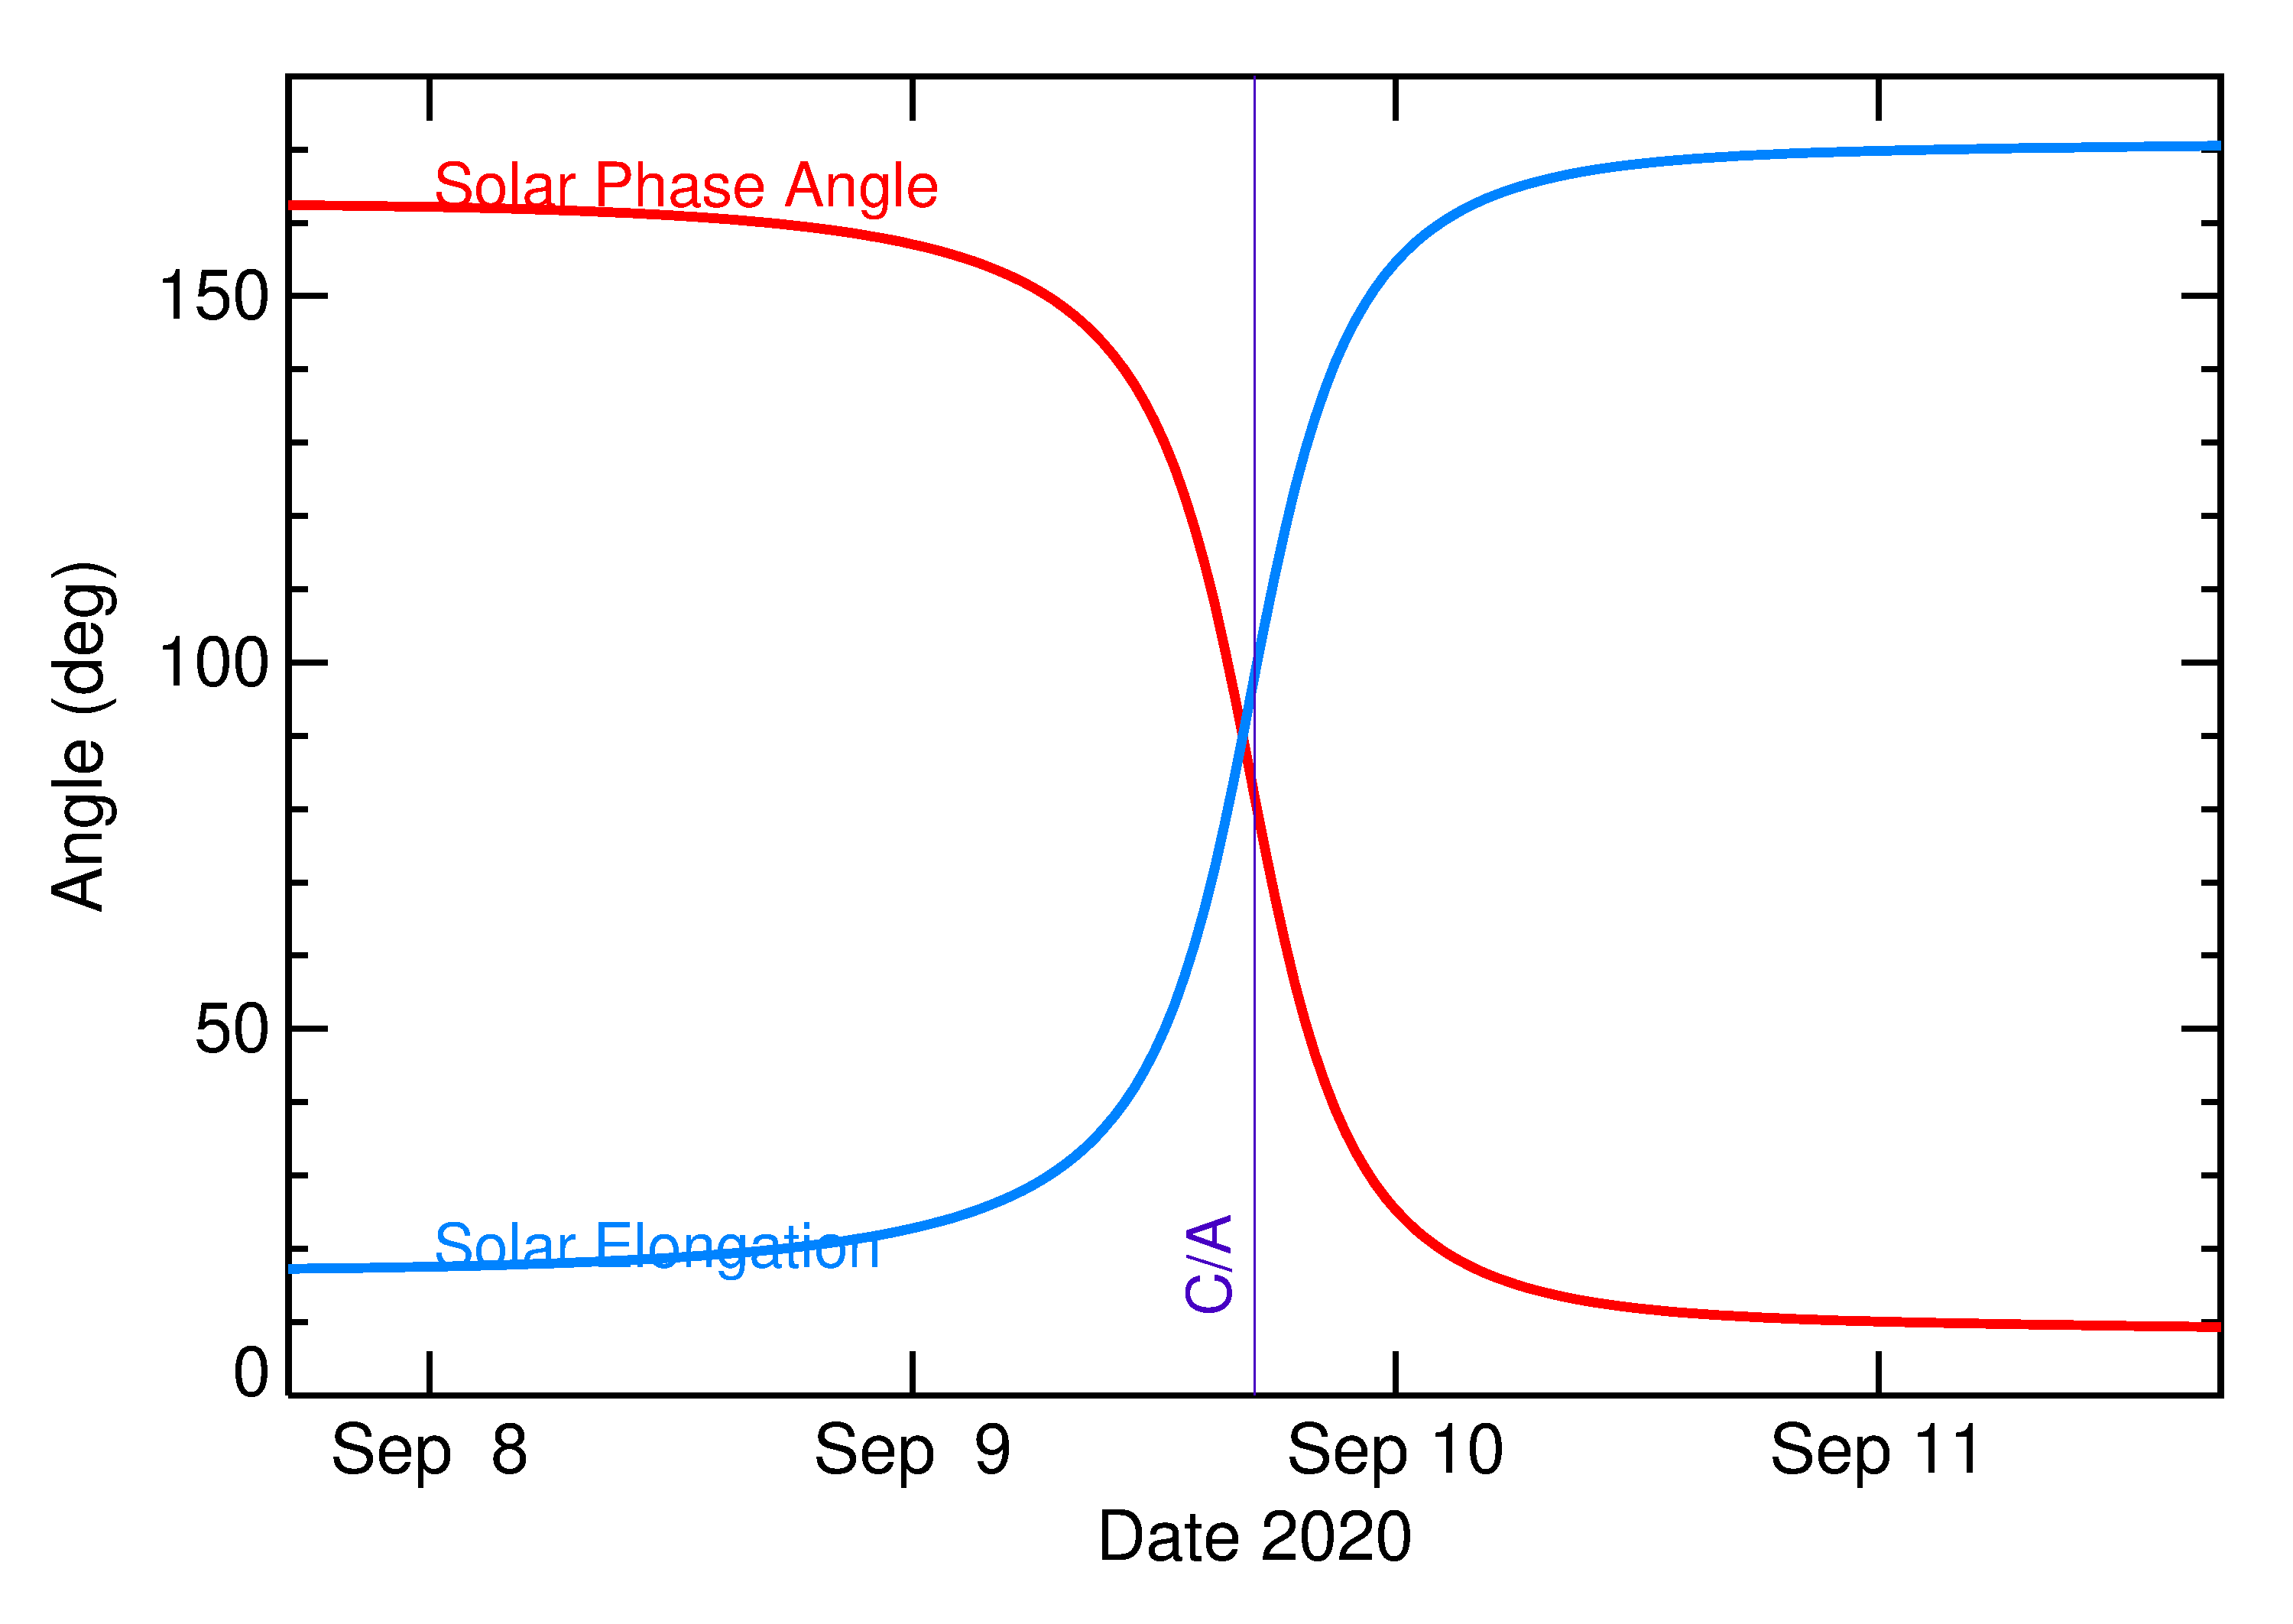 Solar Elongation and Solar Phase Angle of 2020 RE5 in the days around closest approach